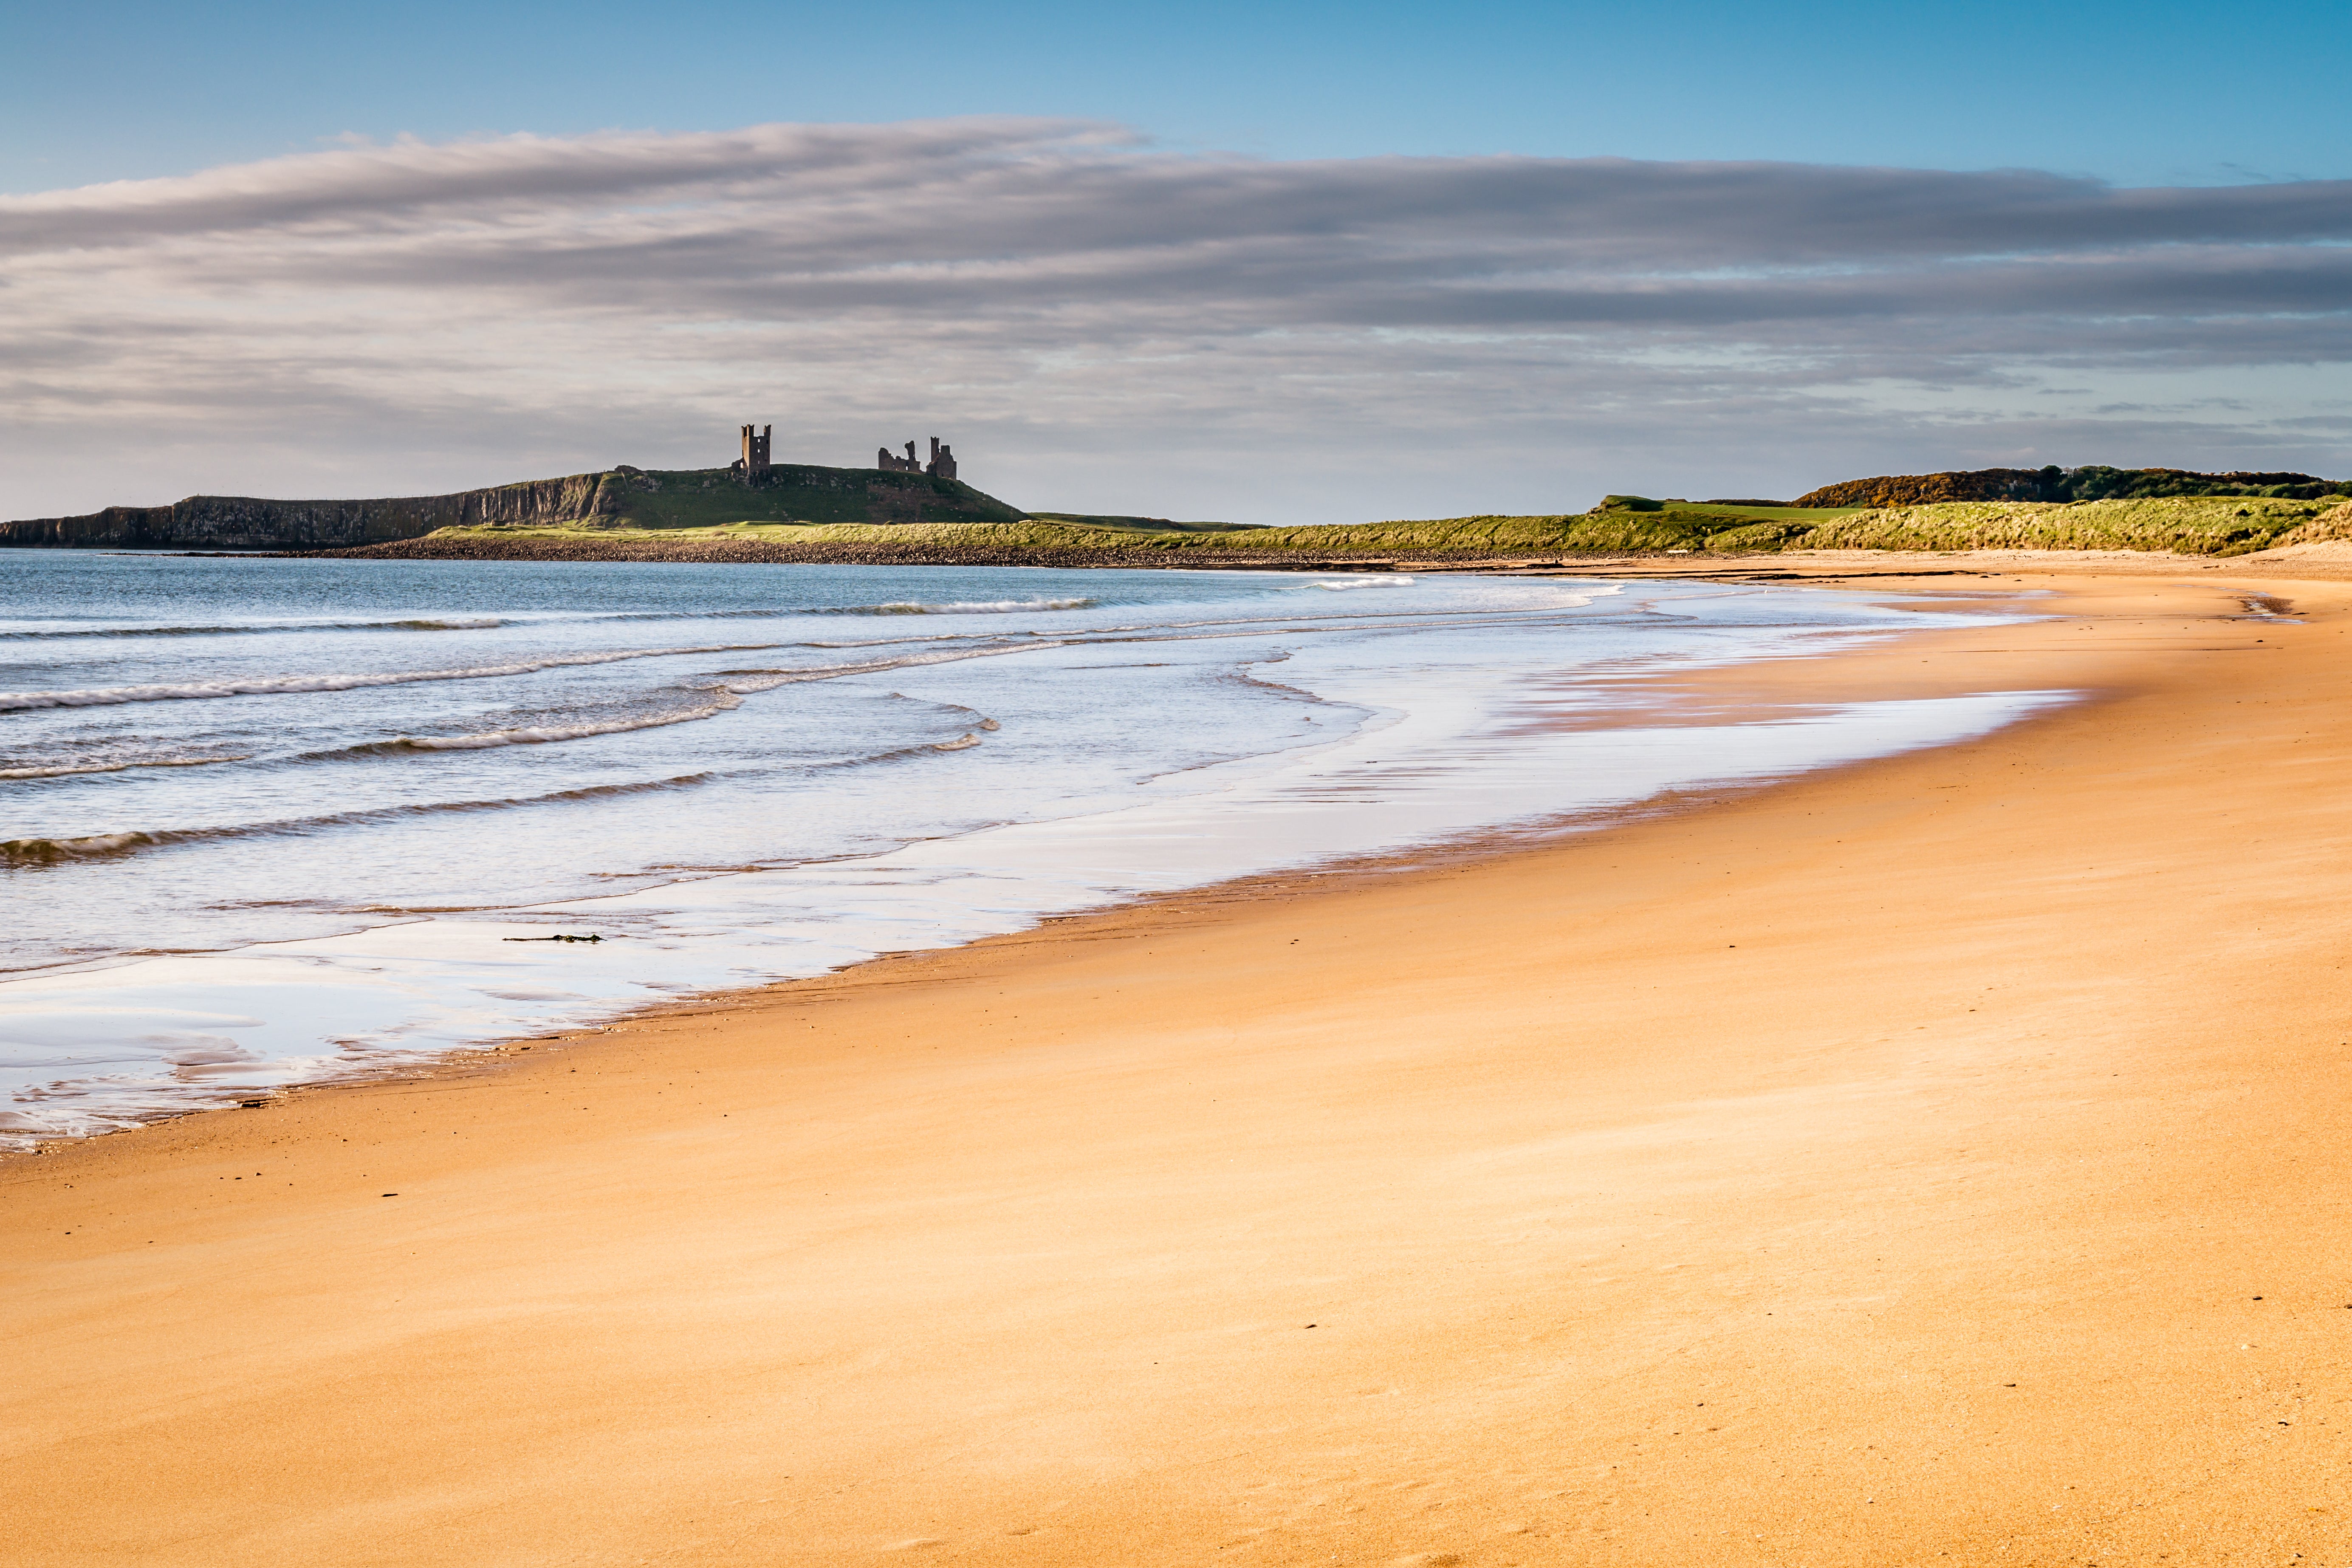 Embleton Bay is overlooked by the ruins of Dunstanburgh Castle